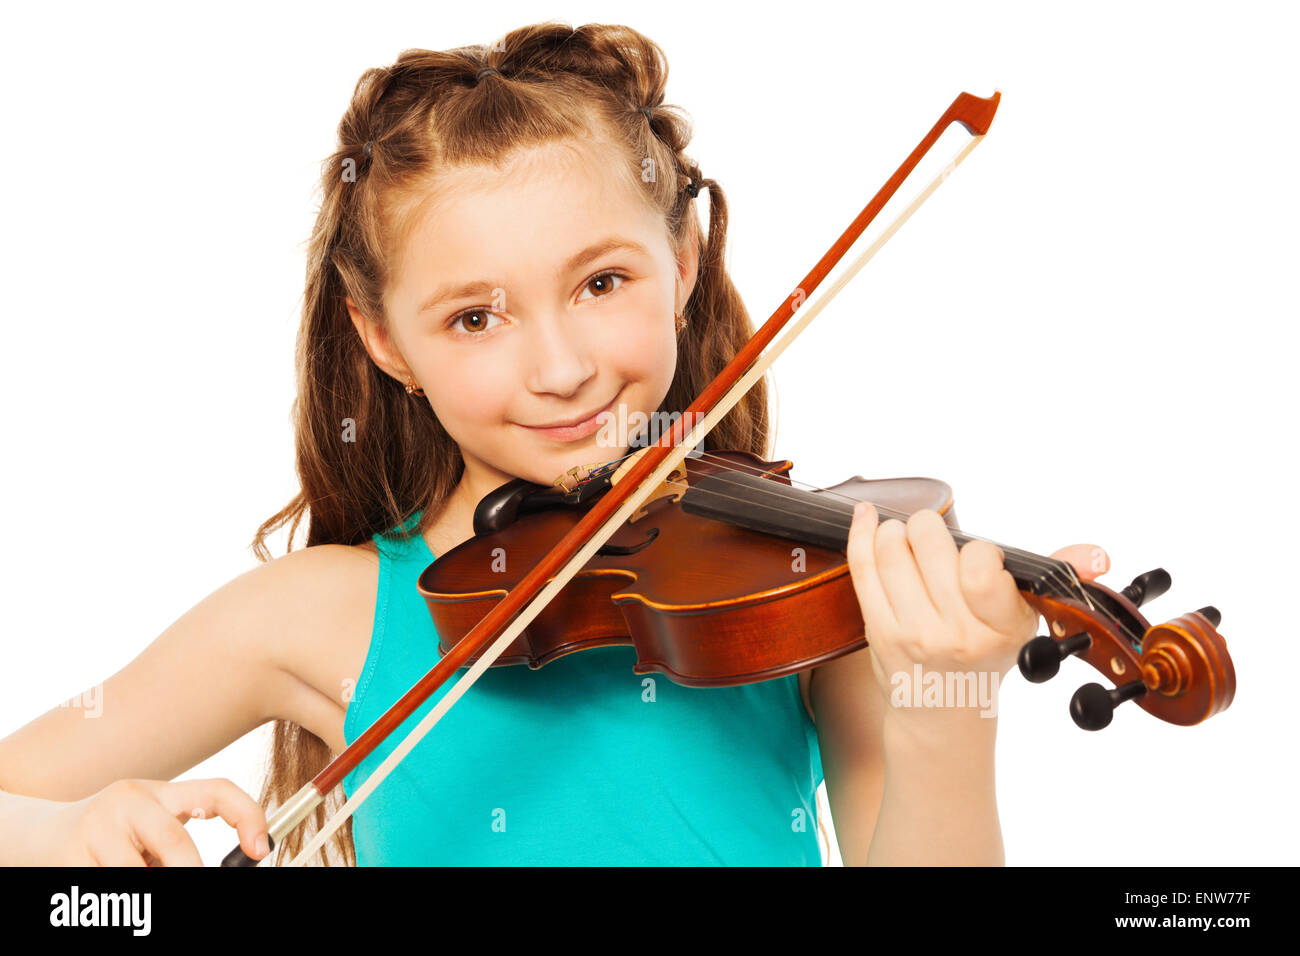 Beautiful girl with long hair playing on violin Stock Photo - Alamy